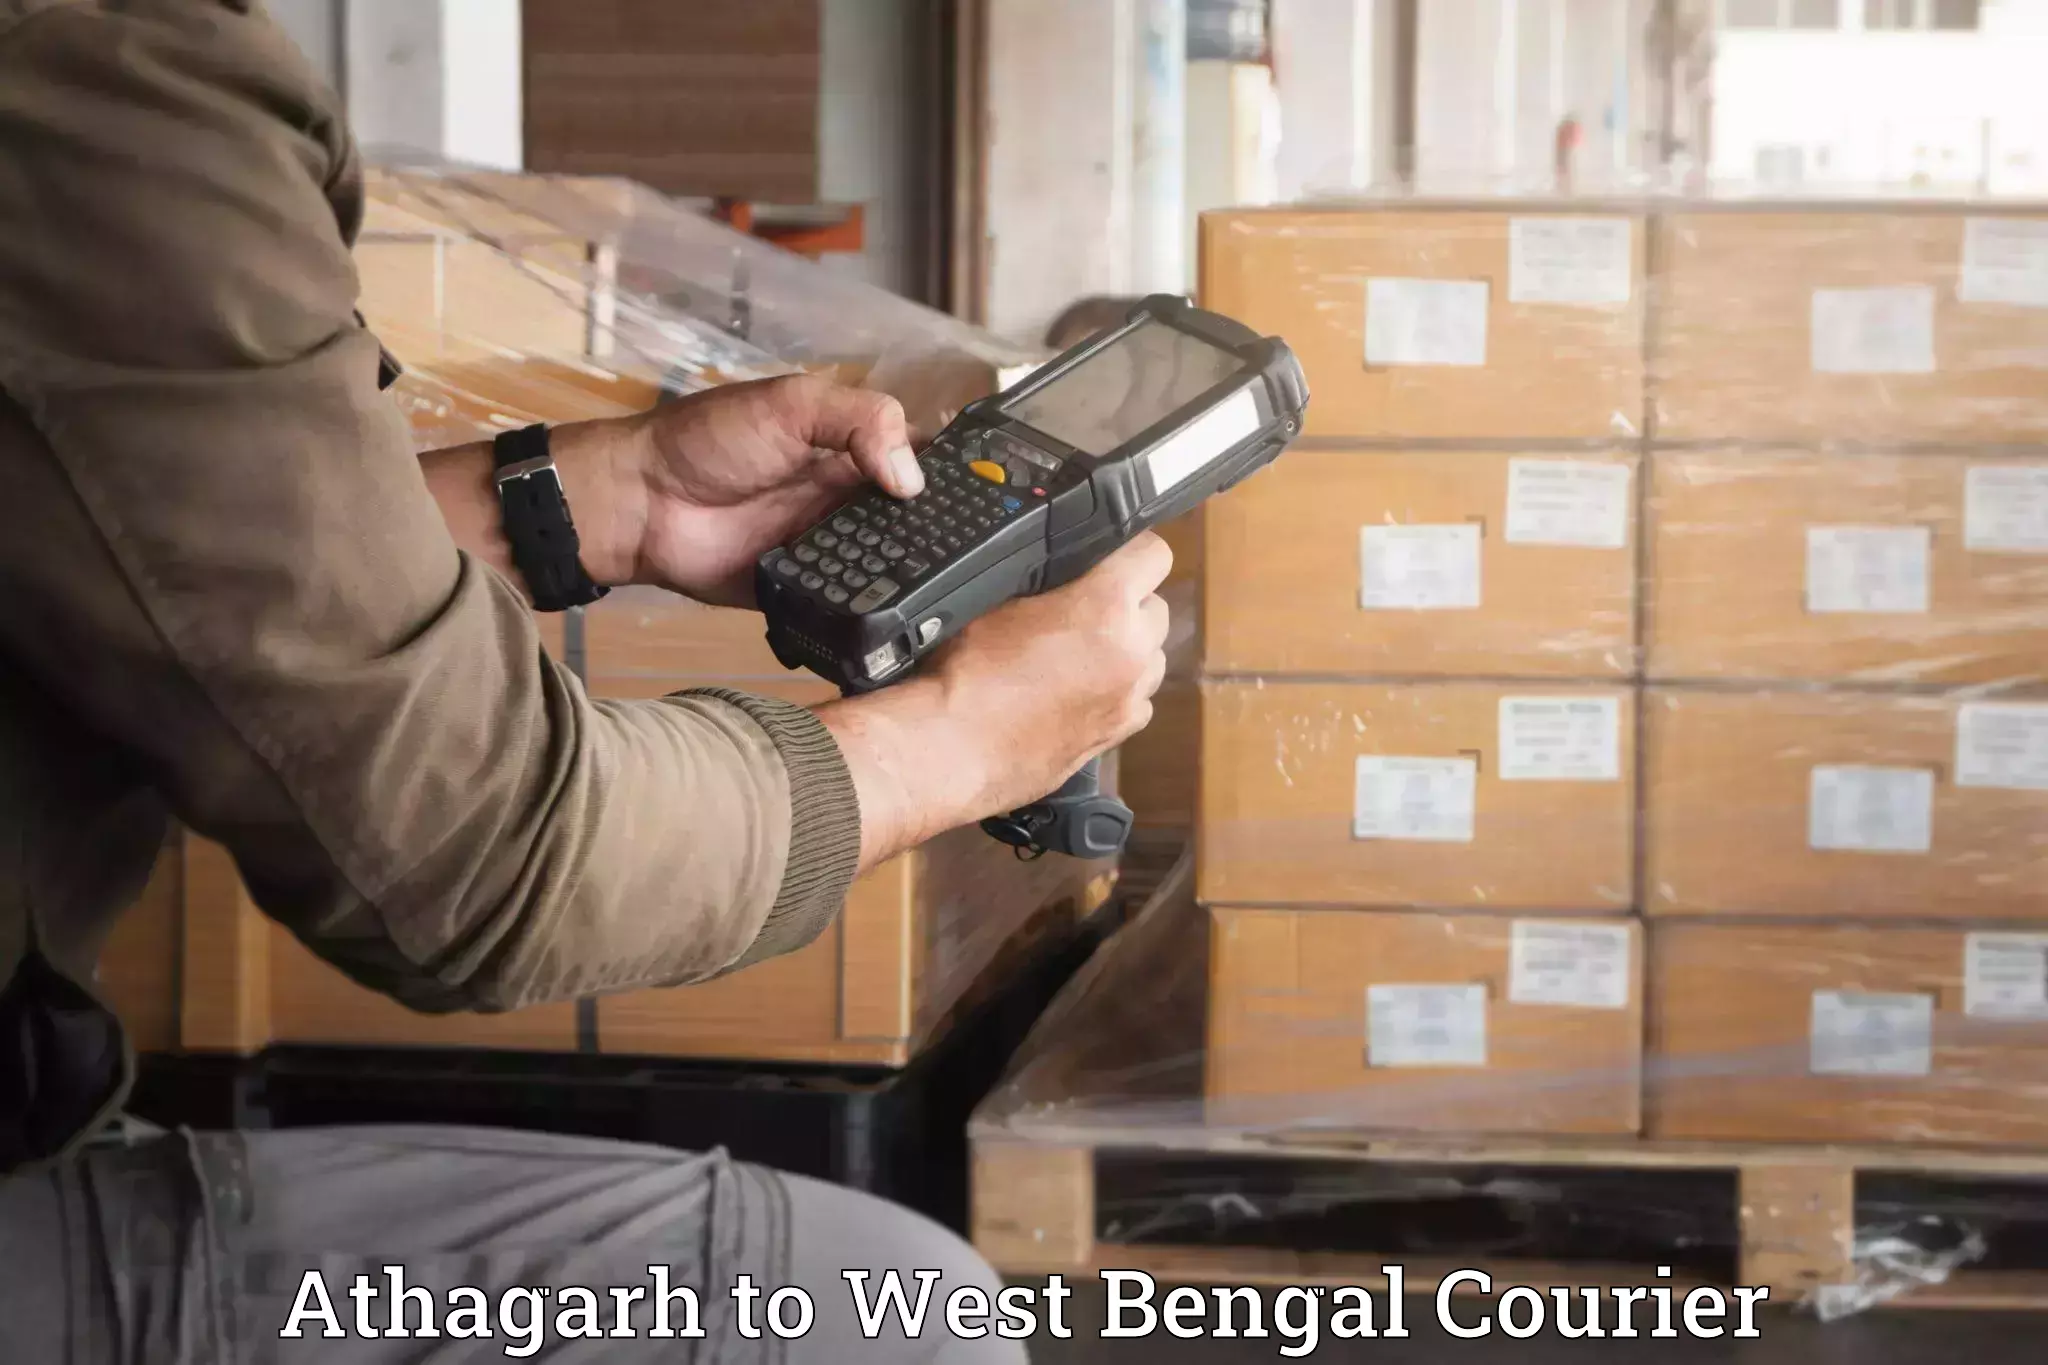 Budget-friendly movers Athagarh to West Bengal